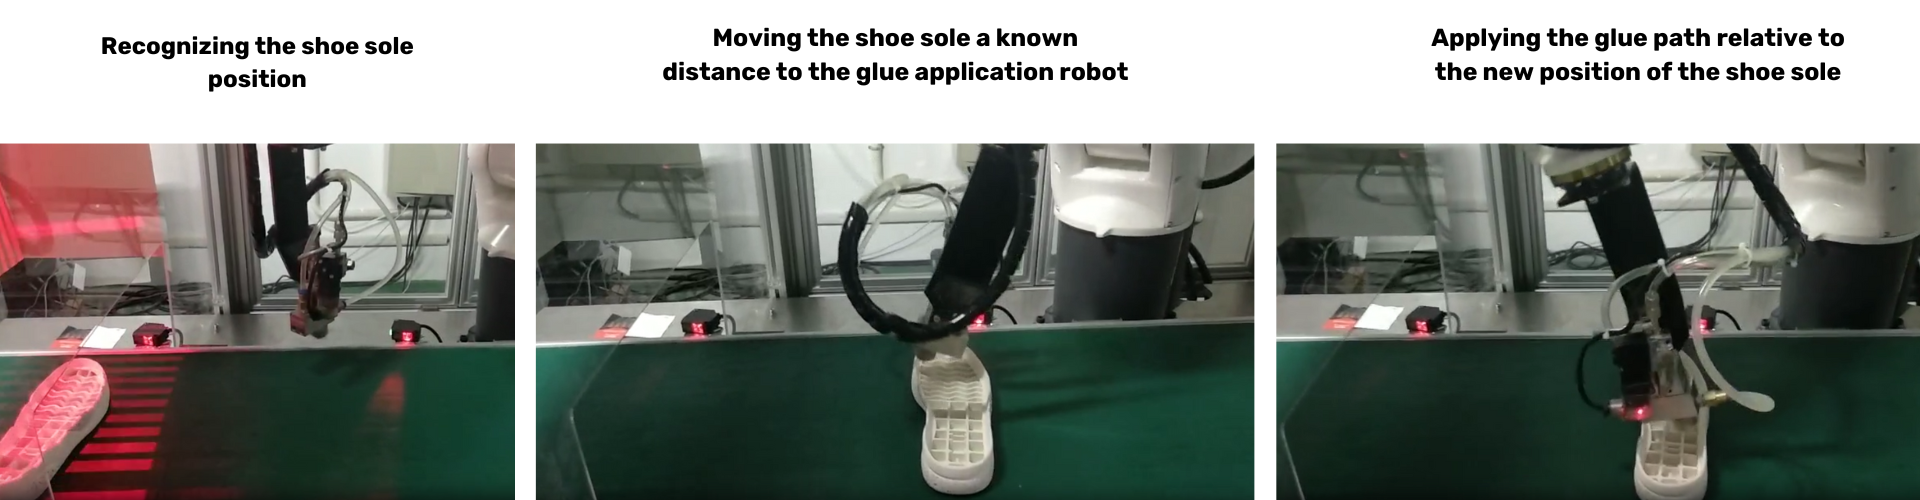 Shoe sole 3D recognition process for creating a glue path for robotic automation